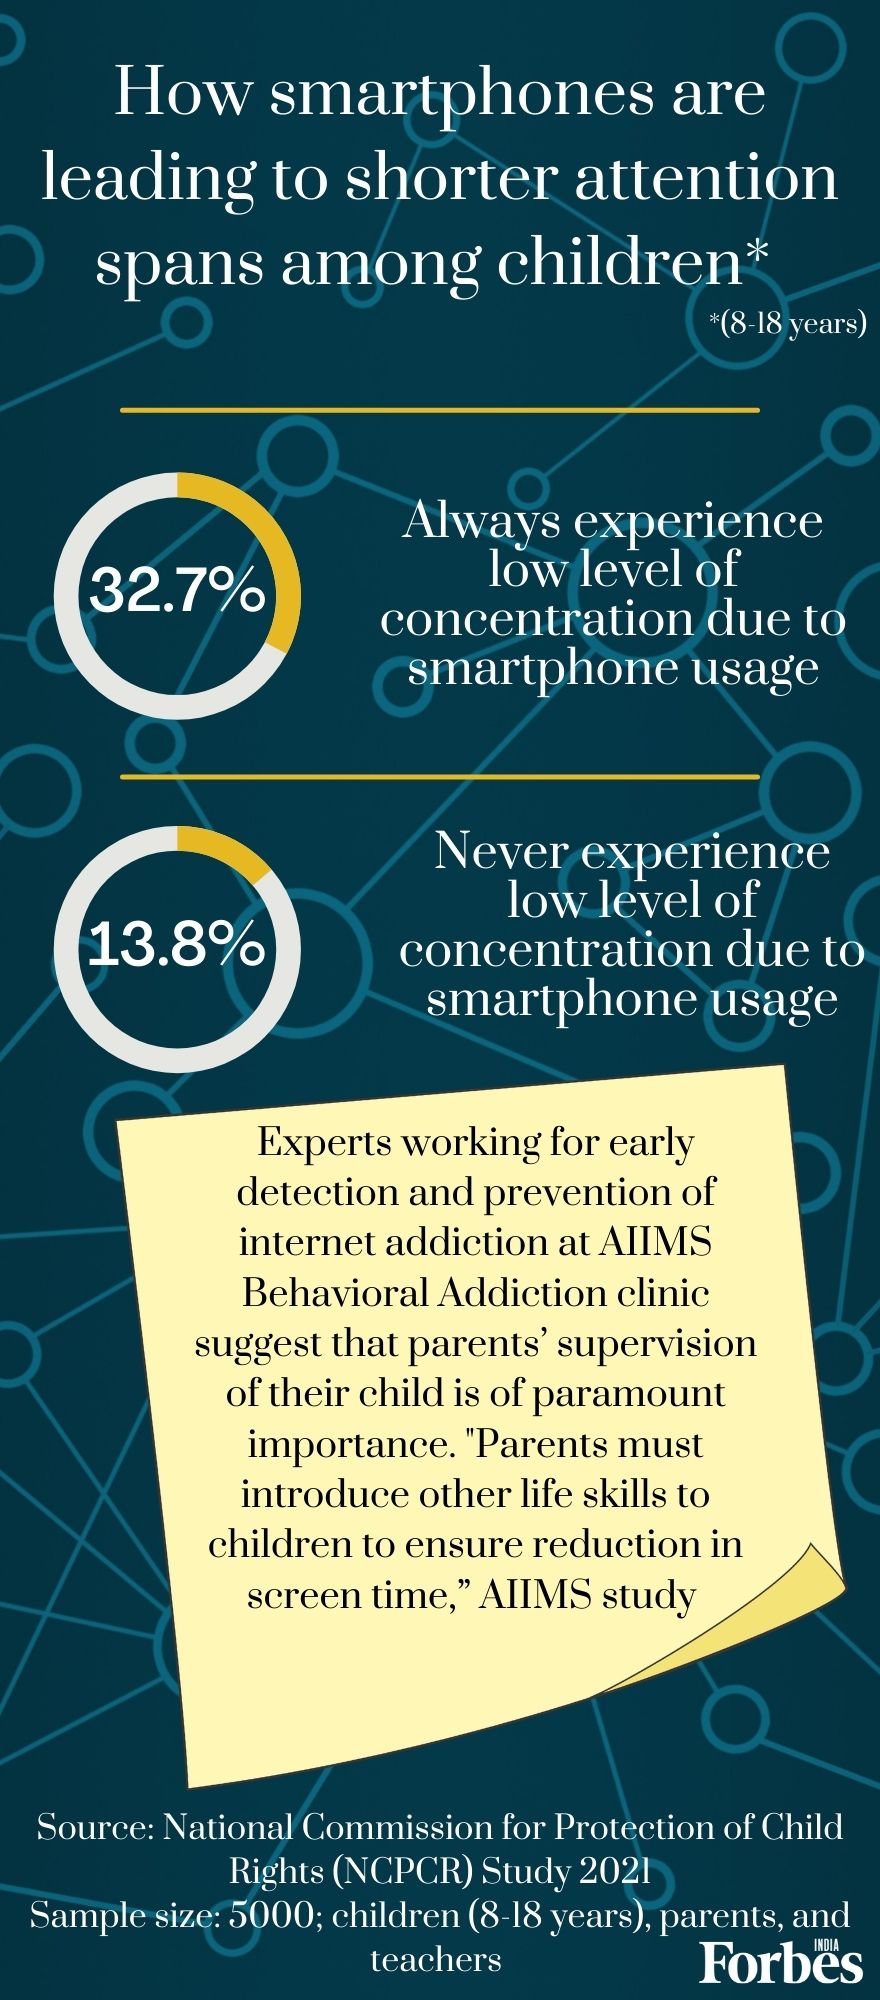 32.7% children have low concentration level due to smartphones; 80% use them for 2 hours daily